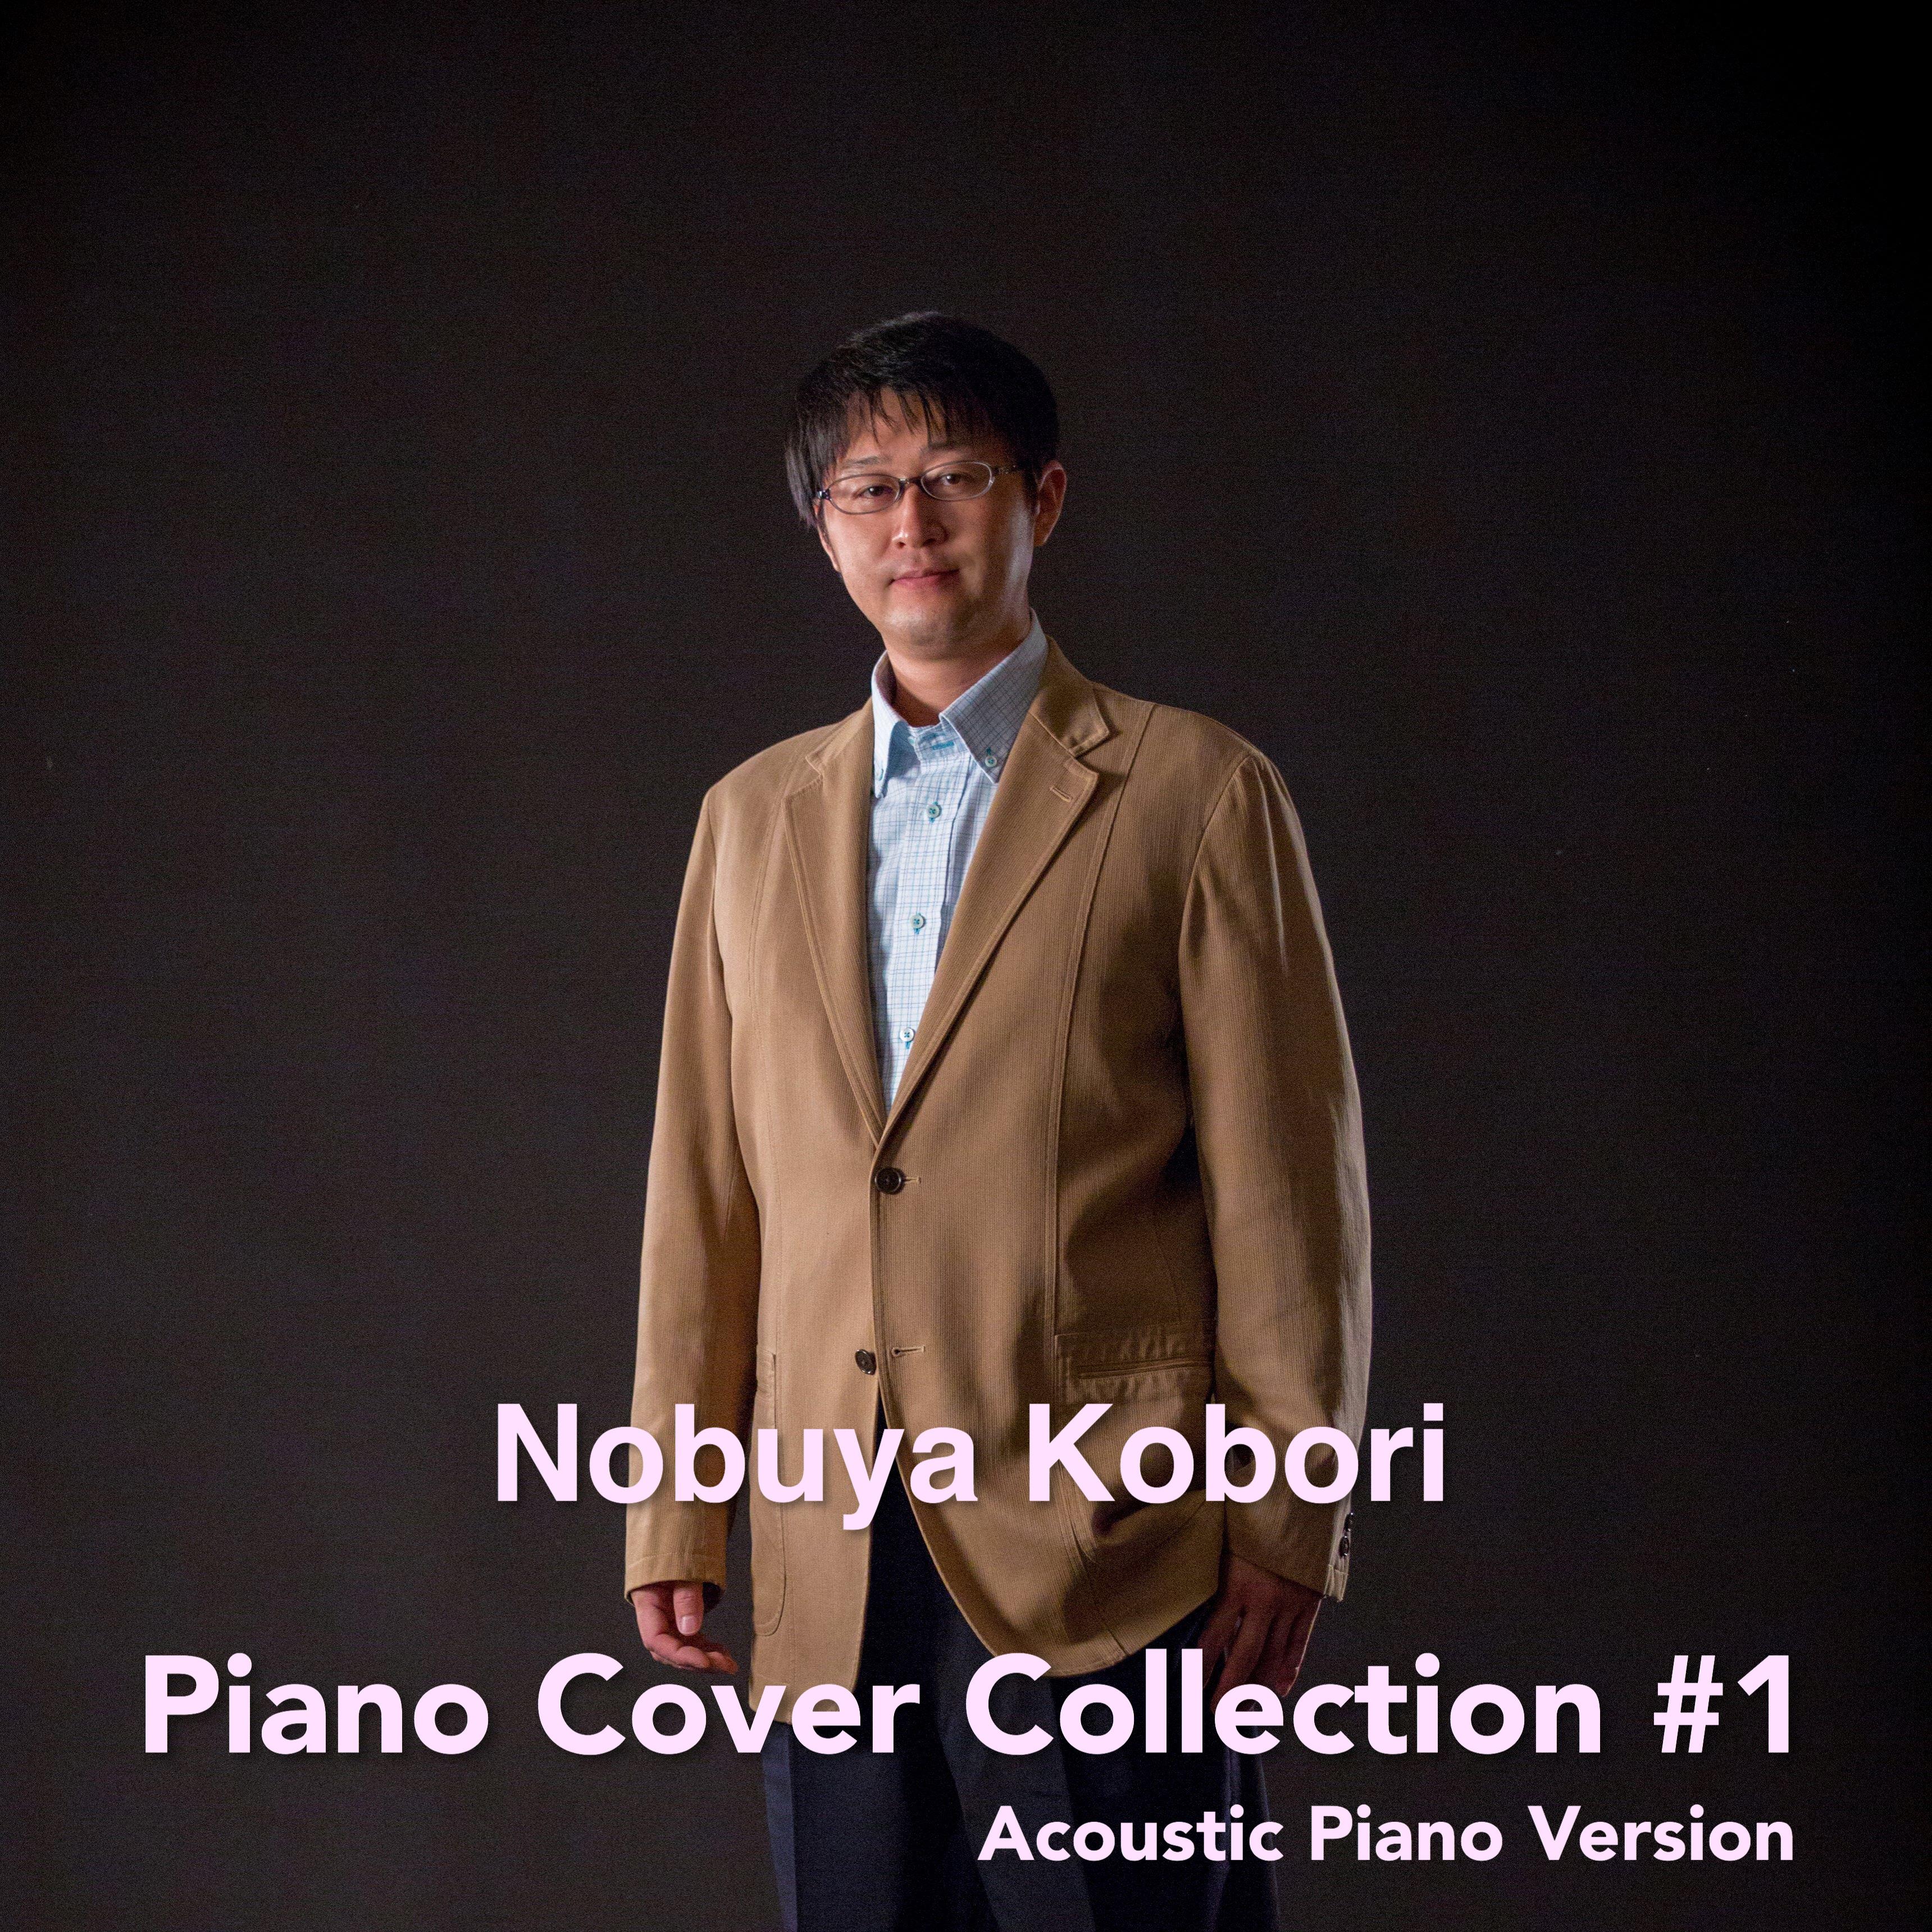 Piano Cover Collection #1